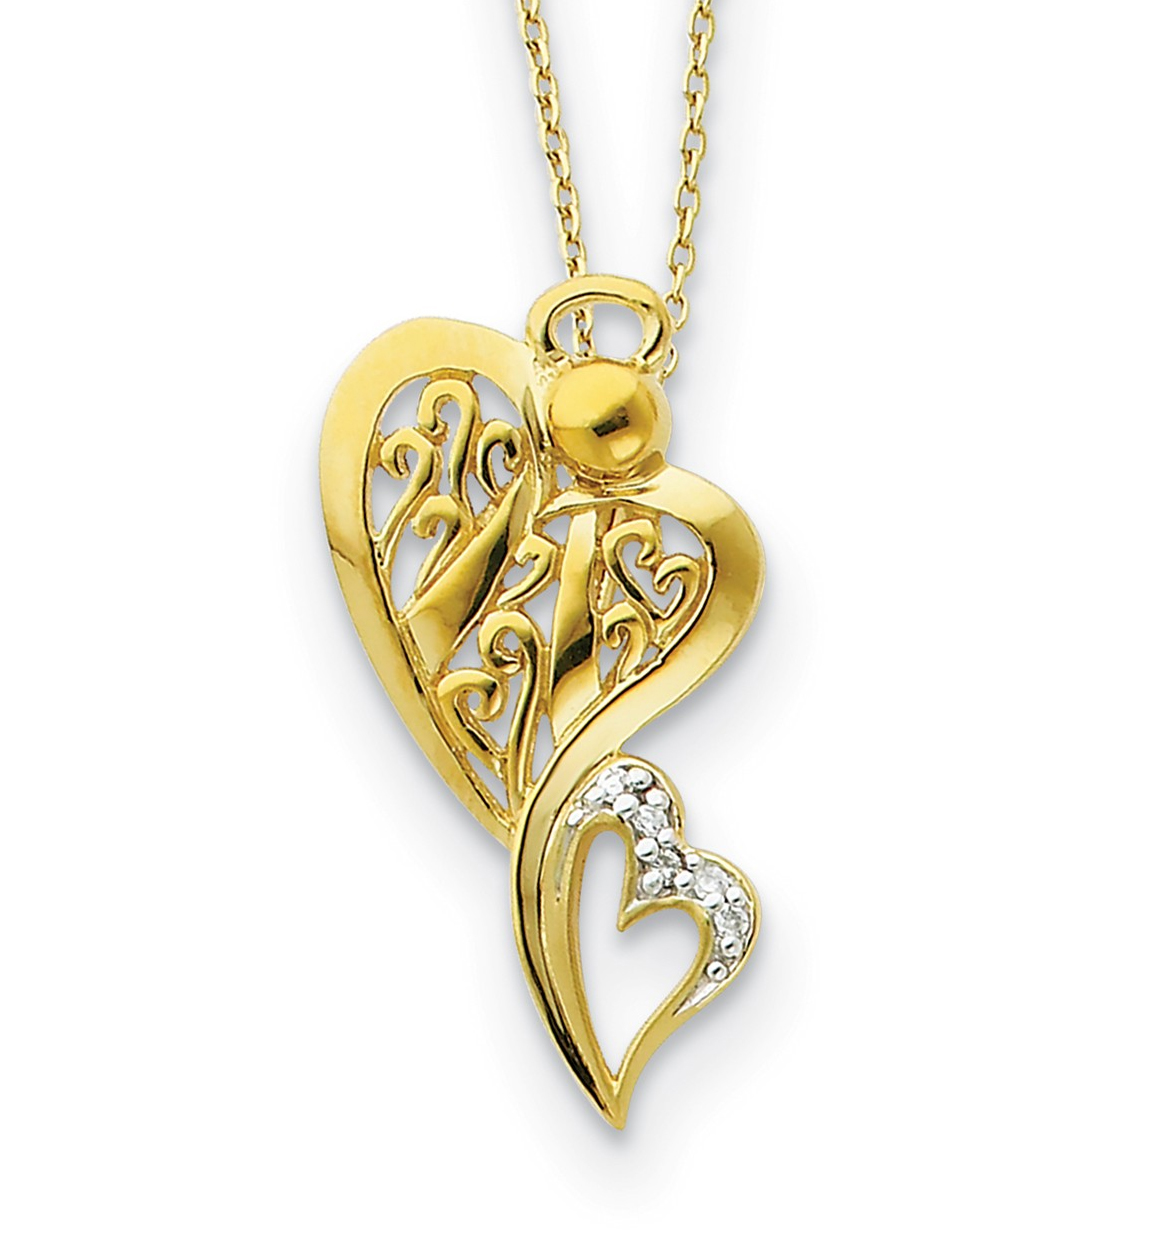 'Angel of Protection' CZ Pendant Necklace, Sterling Silver and Gold-Plated.